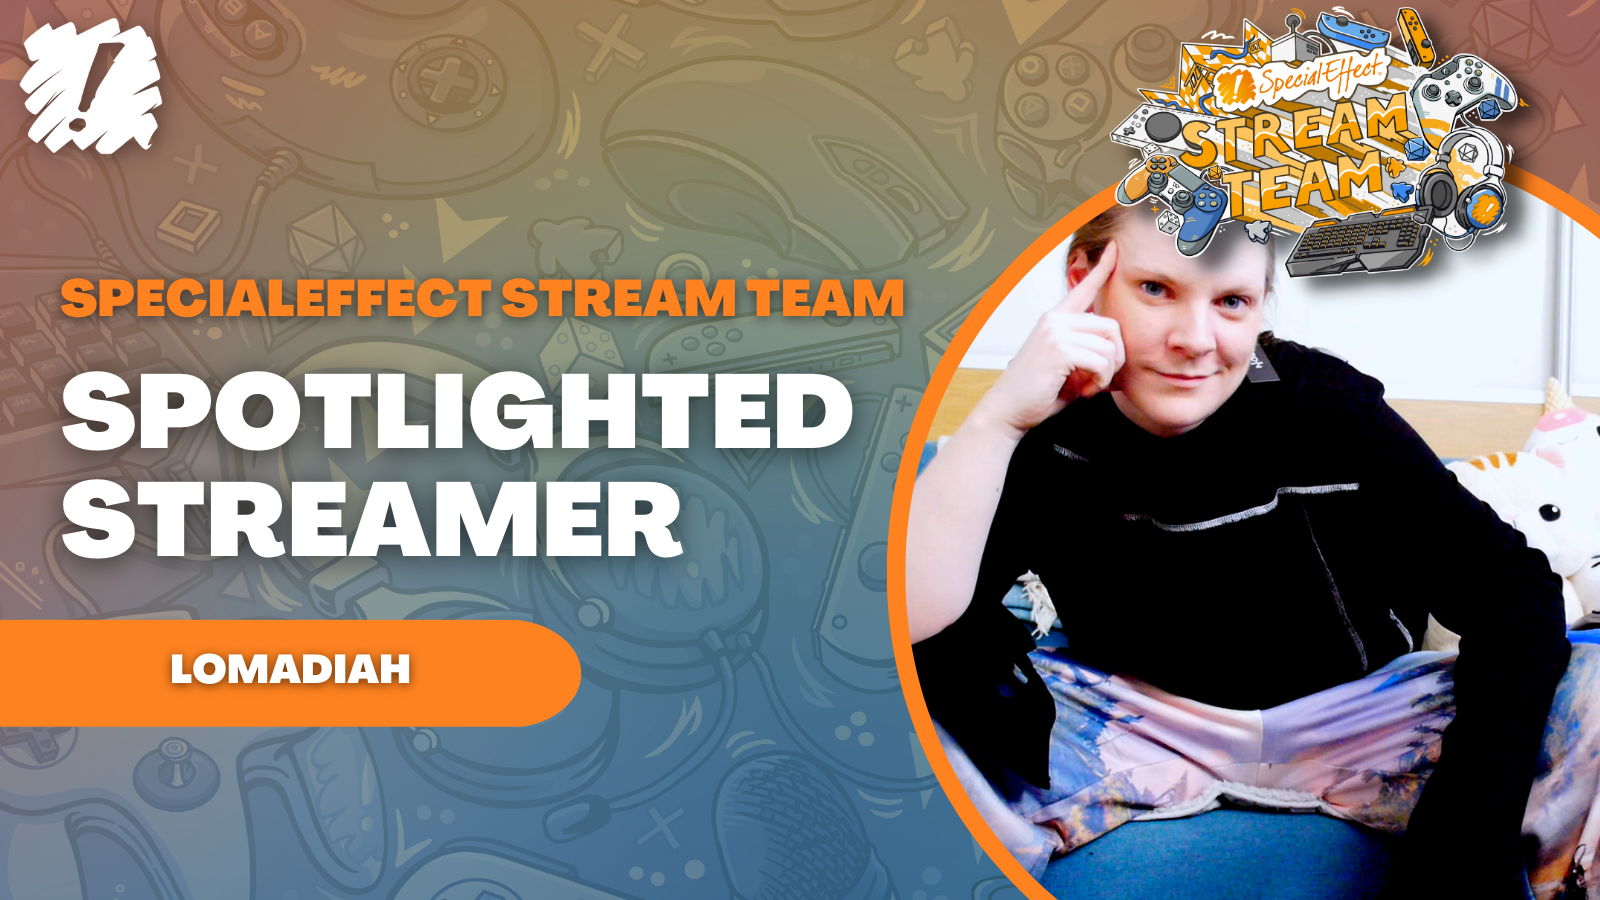 A poster promoting the SpecialEffect Stream Team, showing a women leaning towards the camera.